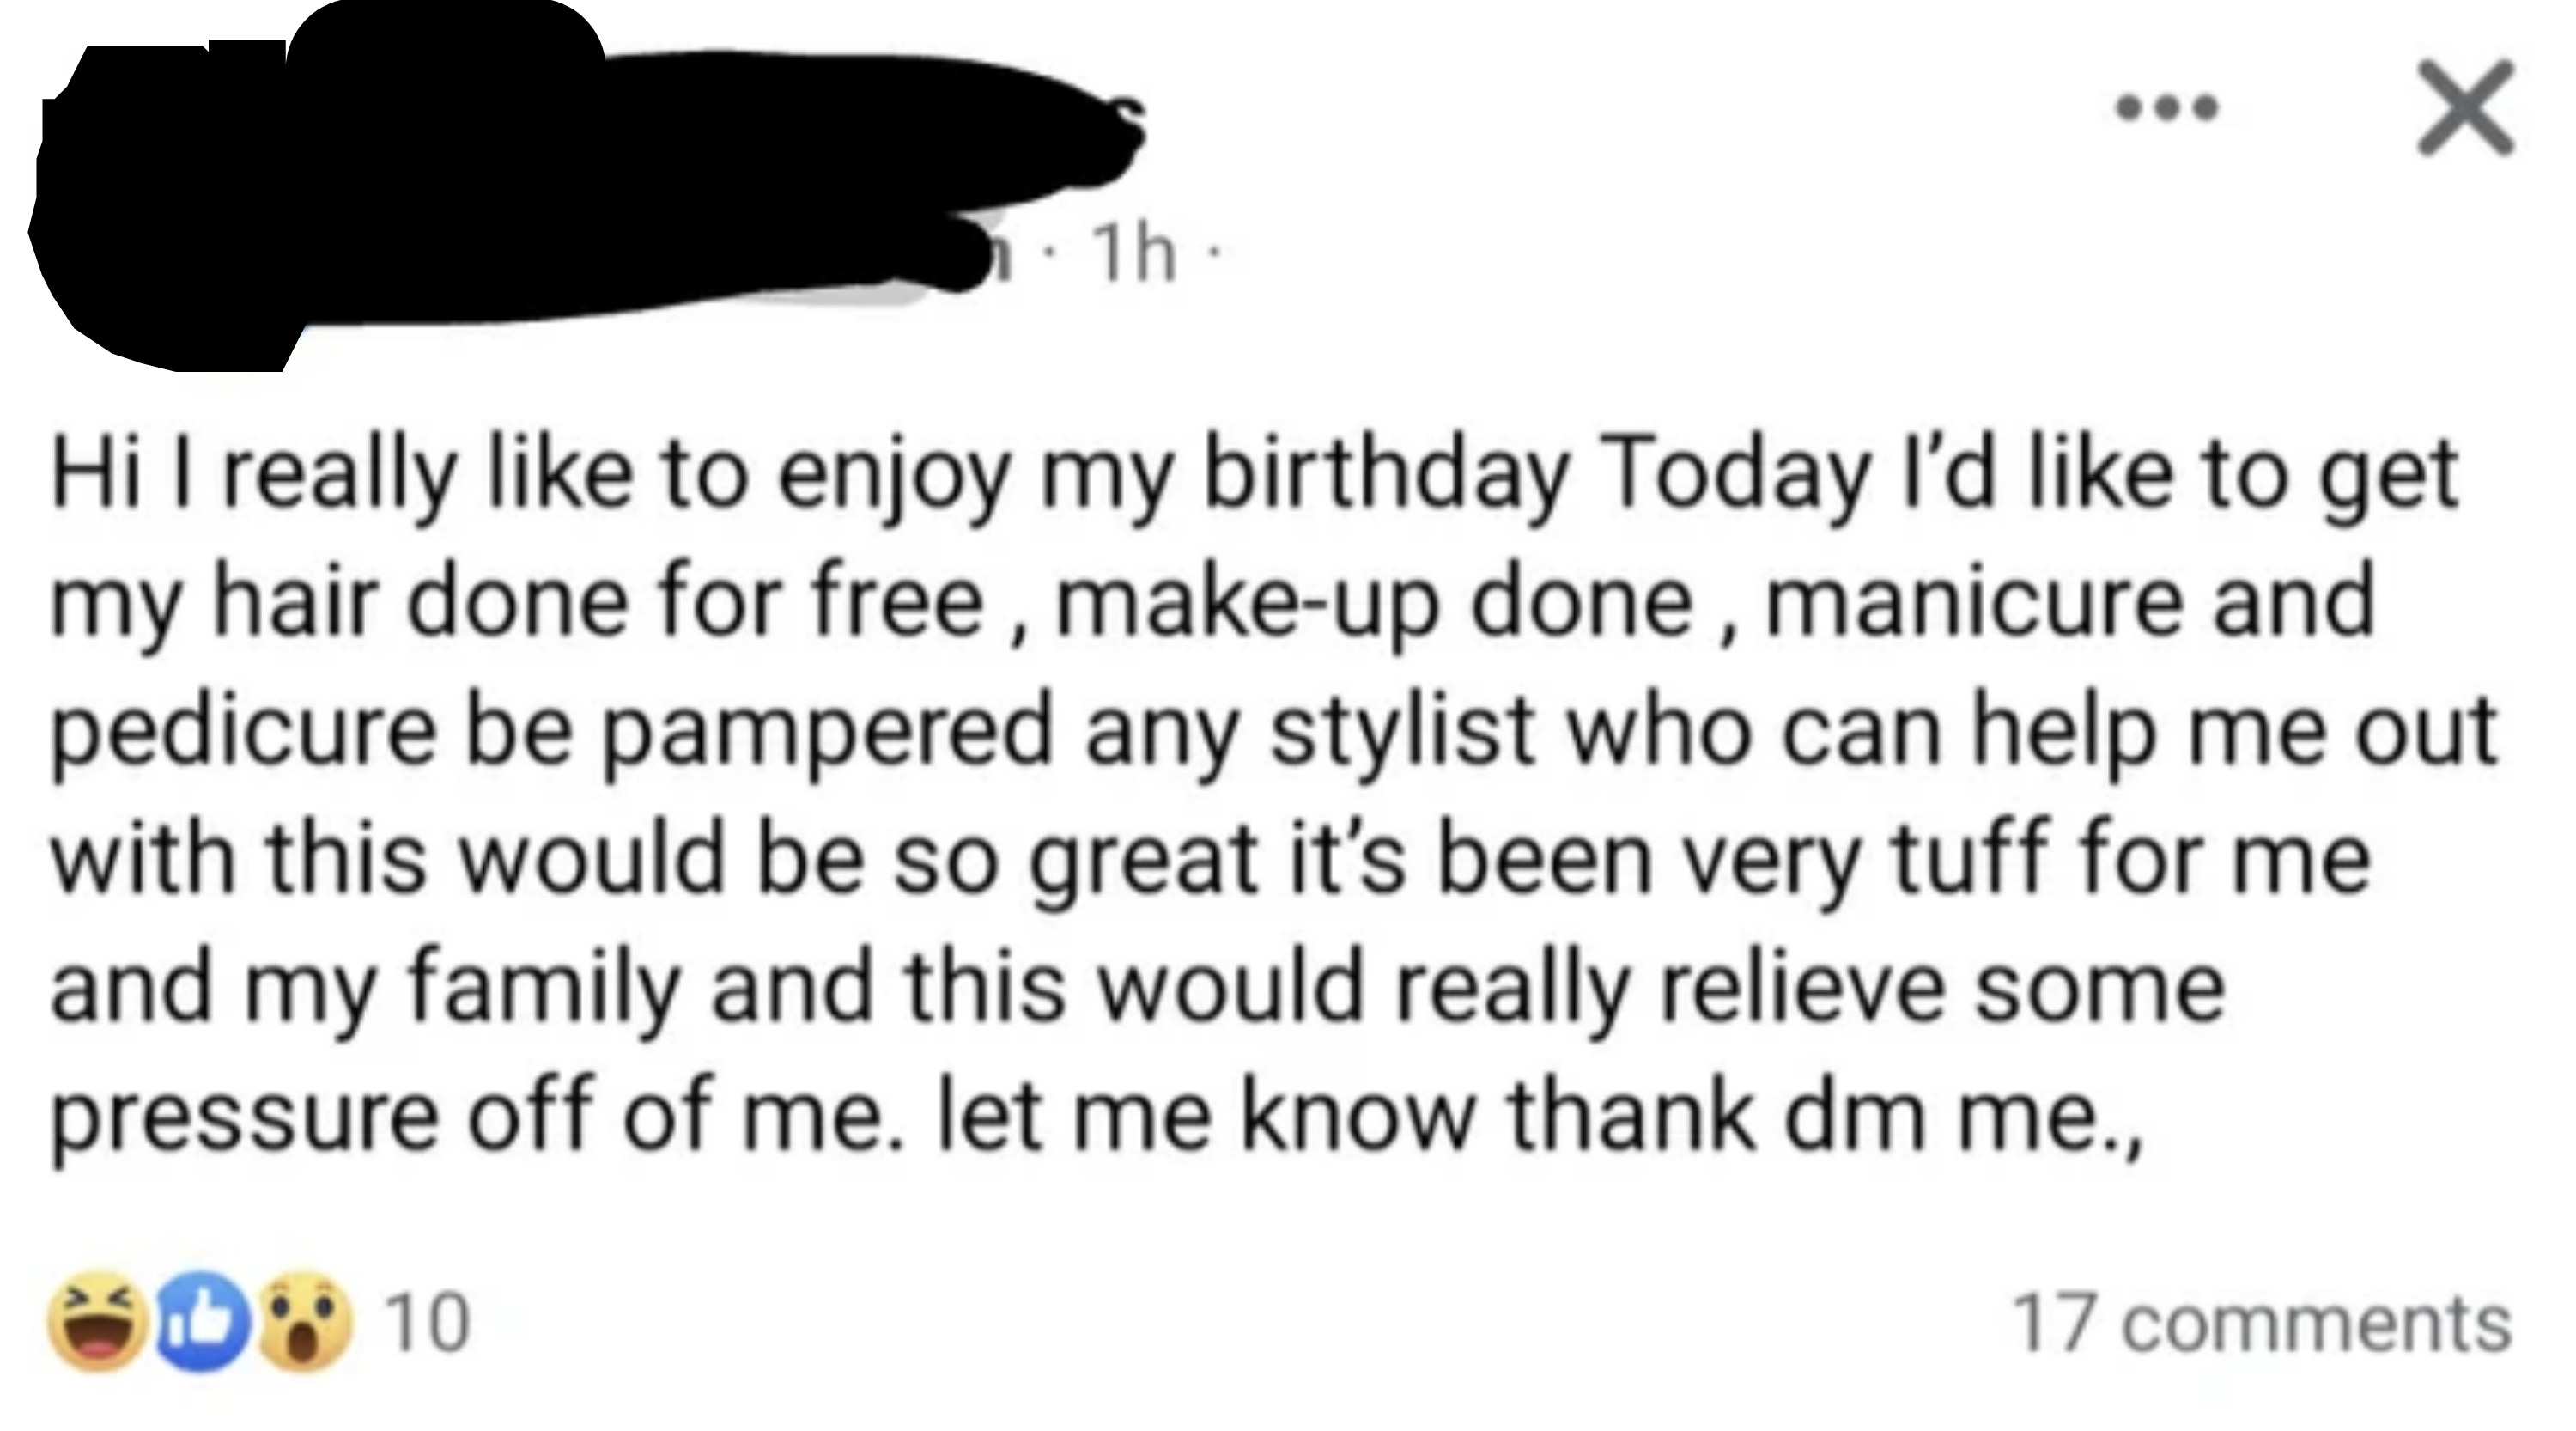 &quot;Today I&#x27;d like to get my hair done for free, make-up done, manicure and pedicure be pampered...&quot;